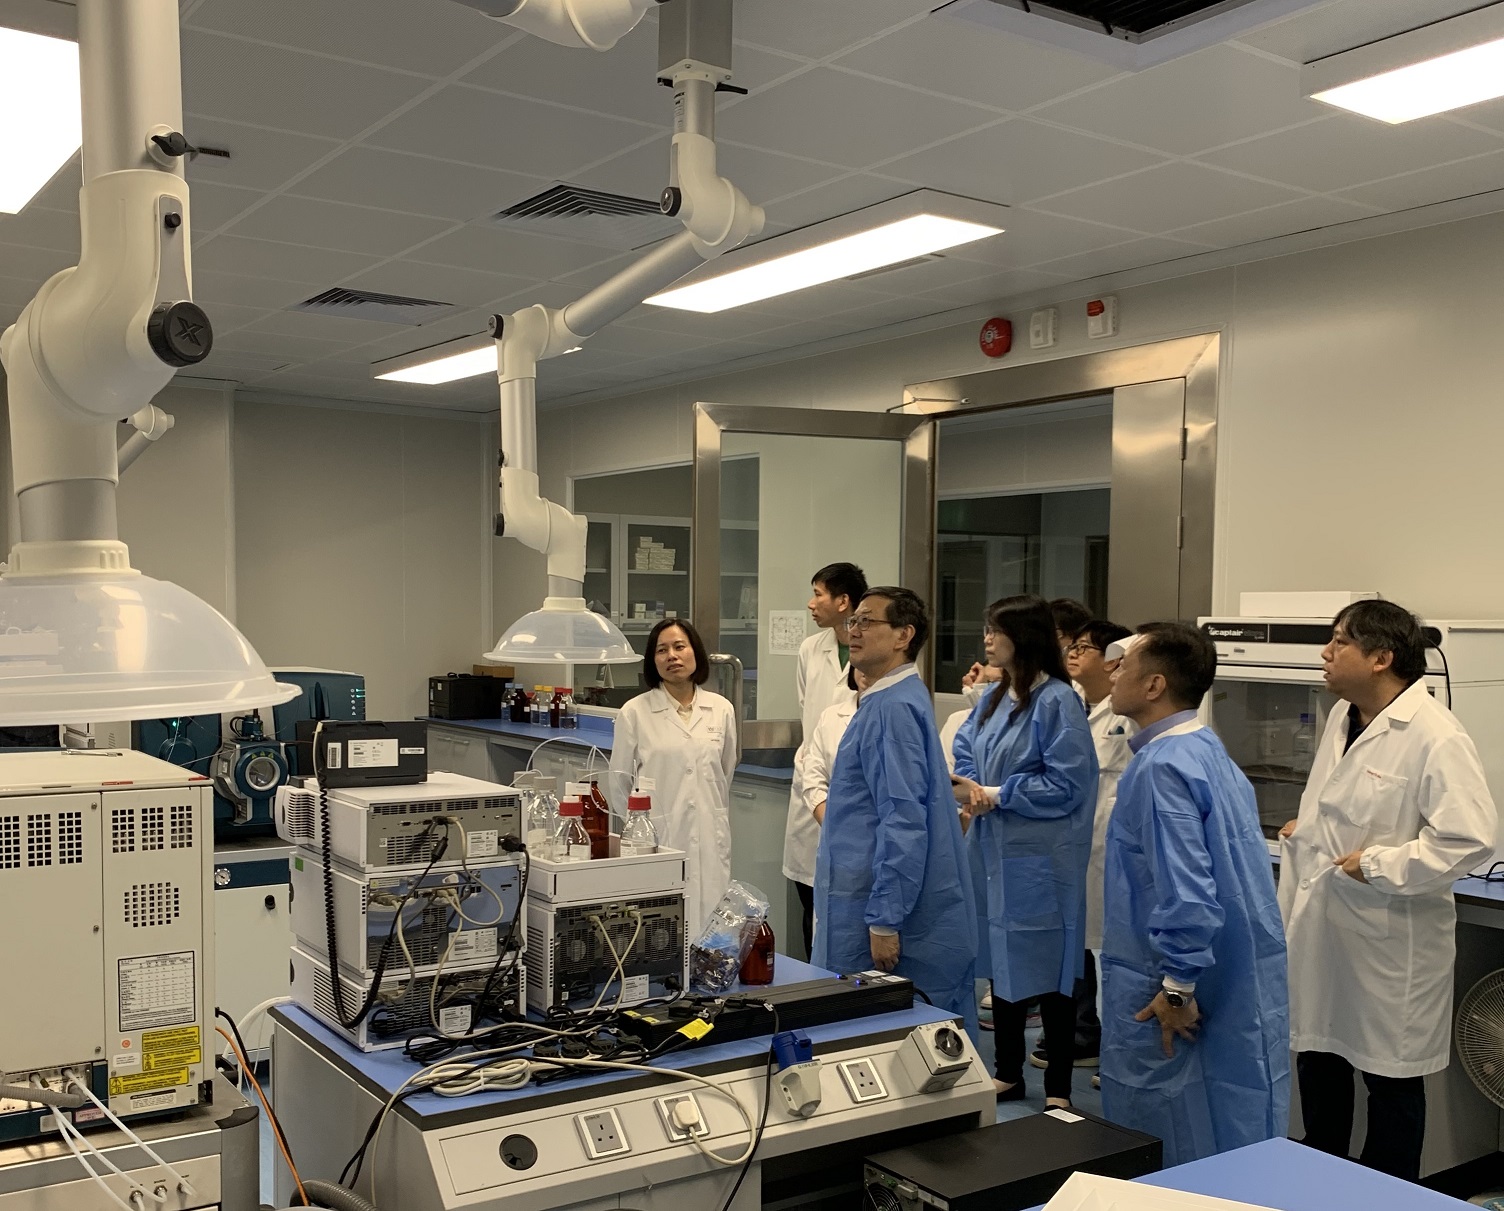 Laboratory tour at the IAM Lab for in-depth discussion about testing of pesticides and examination of radionuclides in foods and environmental samples.